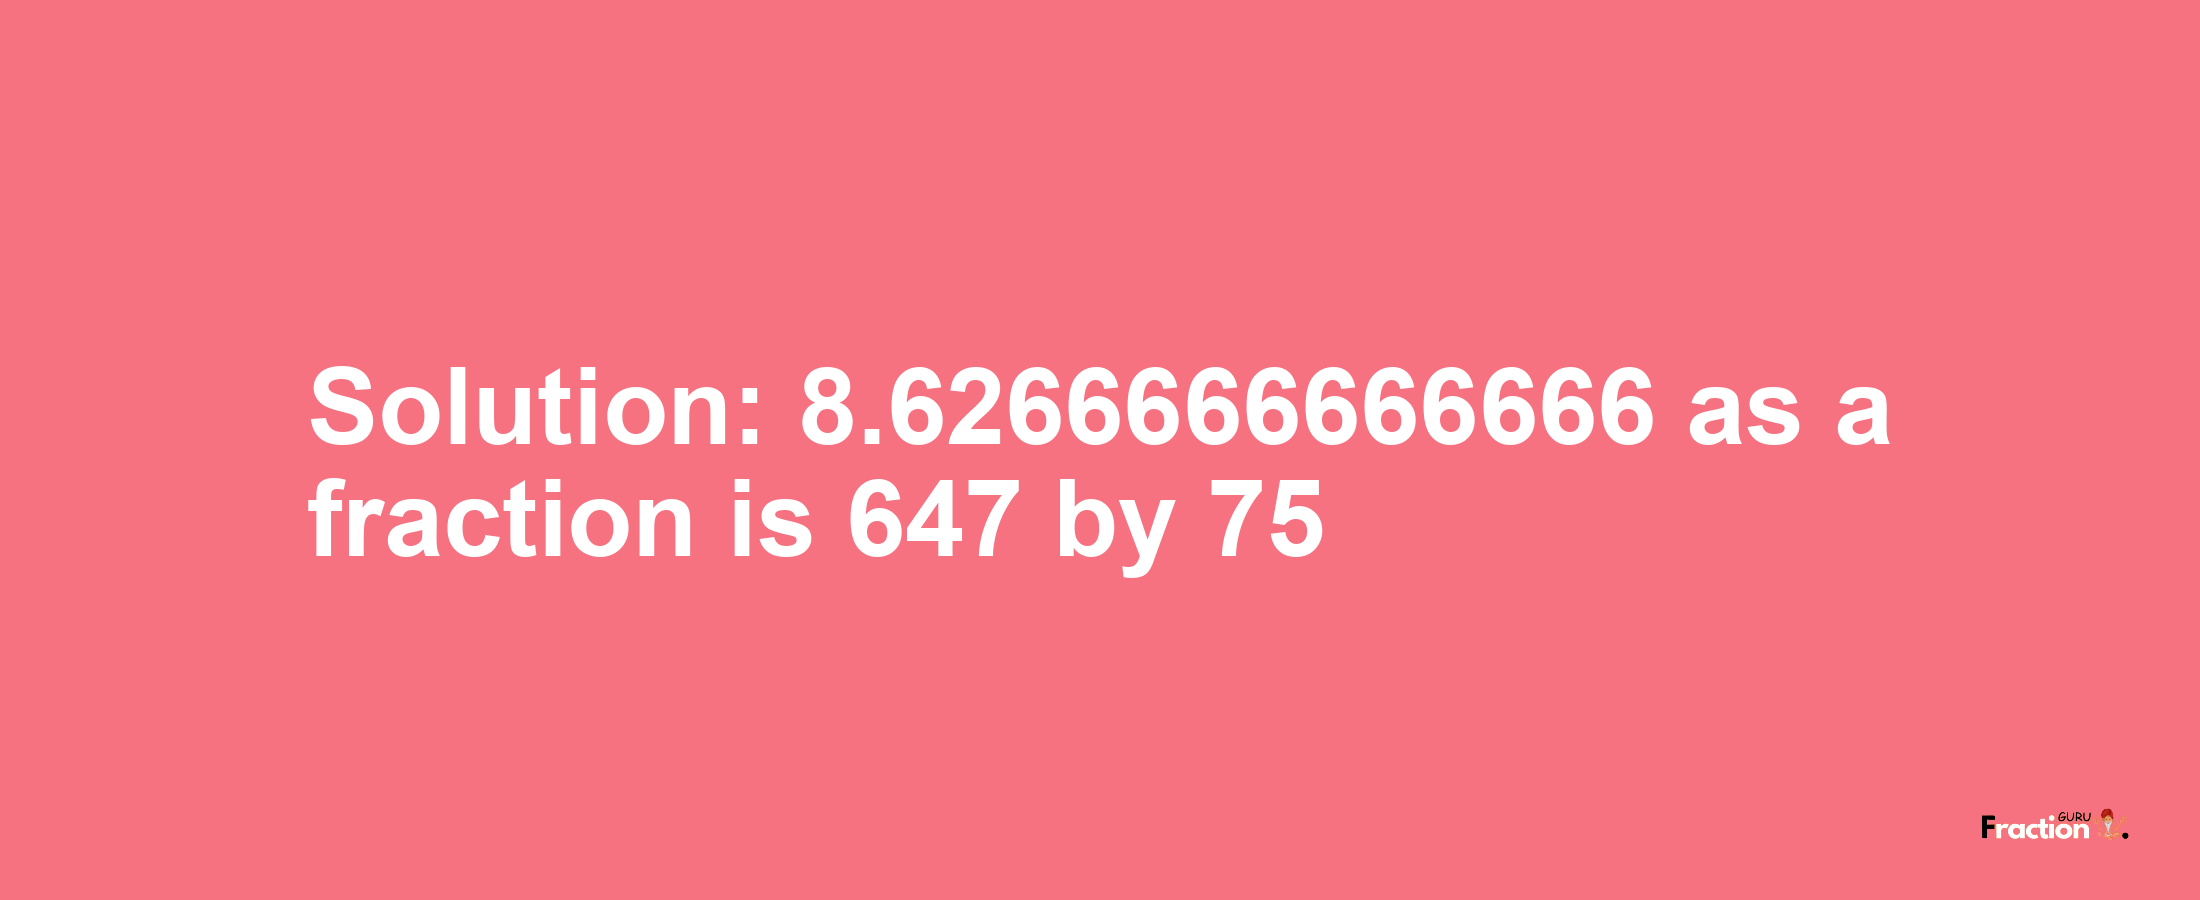 Solution:8.6266666666666 as a fraction is 647/75